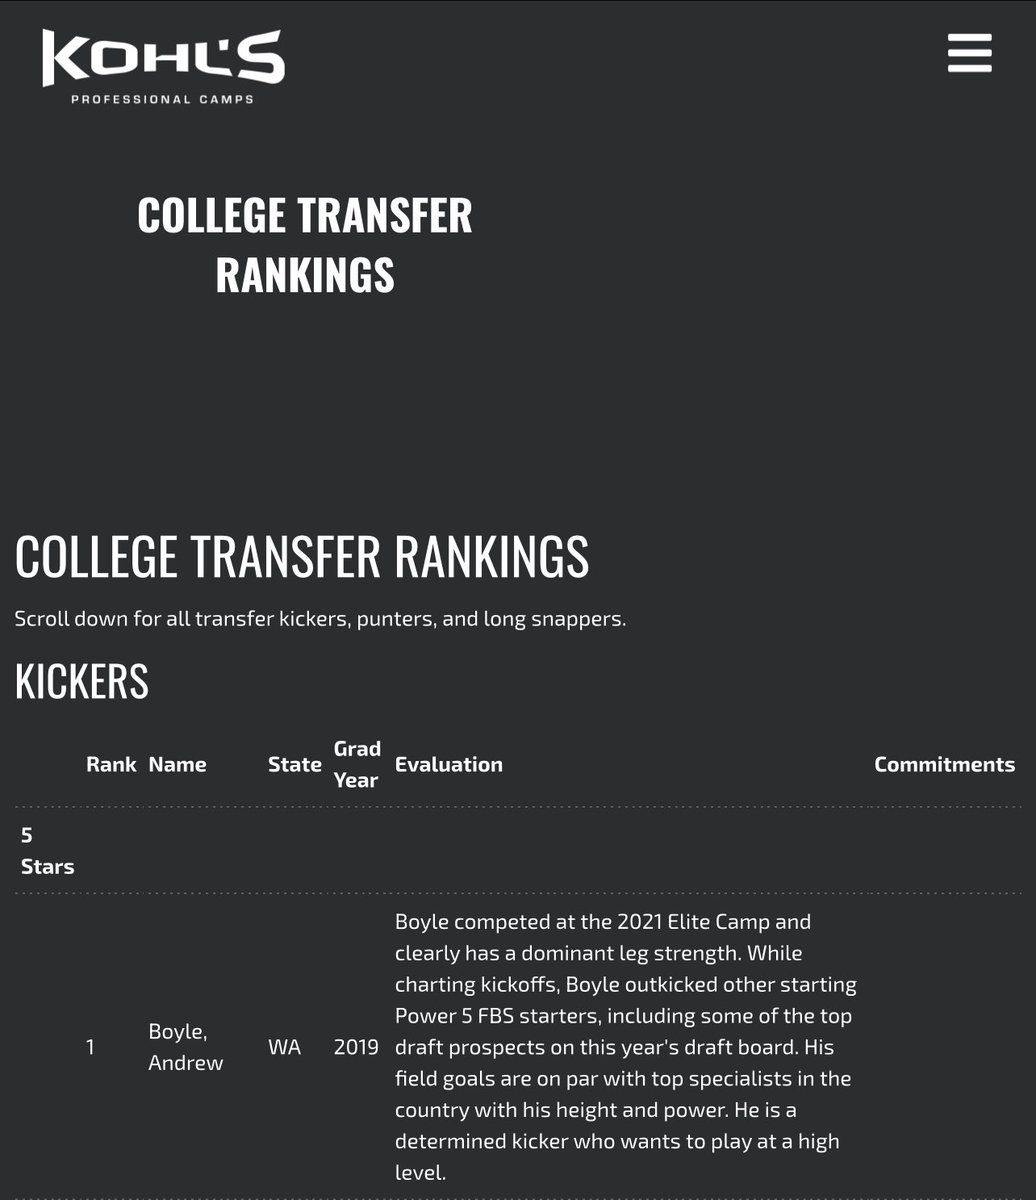 Honored to be ranked the #1 transfer kicker in the country! Thank you to @KohlsKicking for all their help and training through the years!